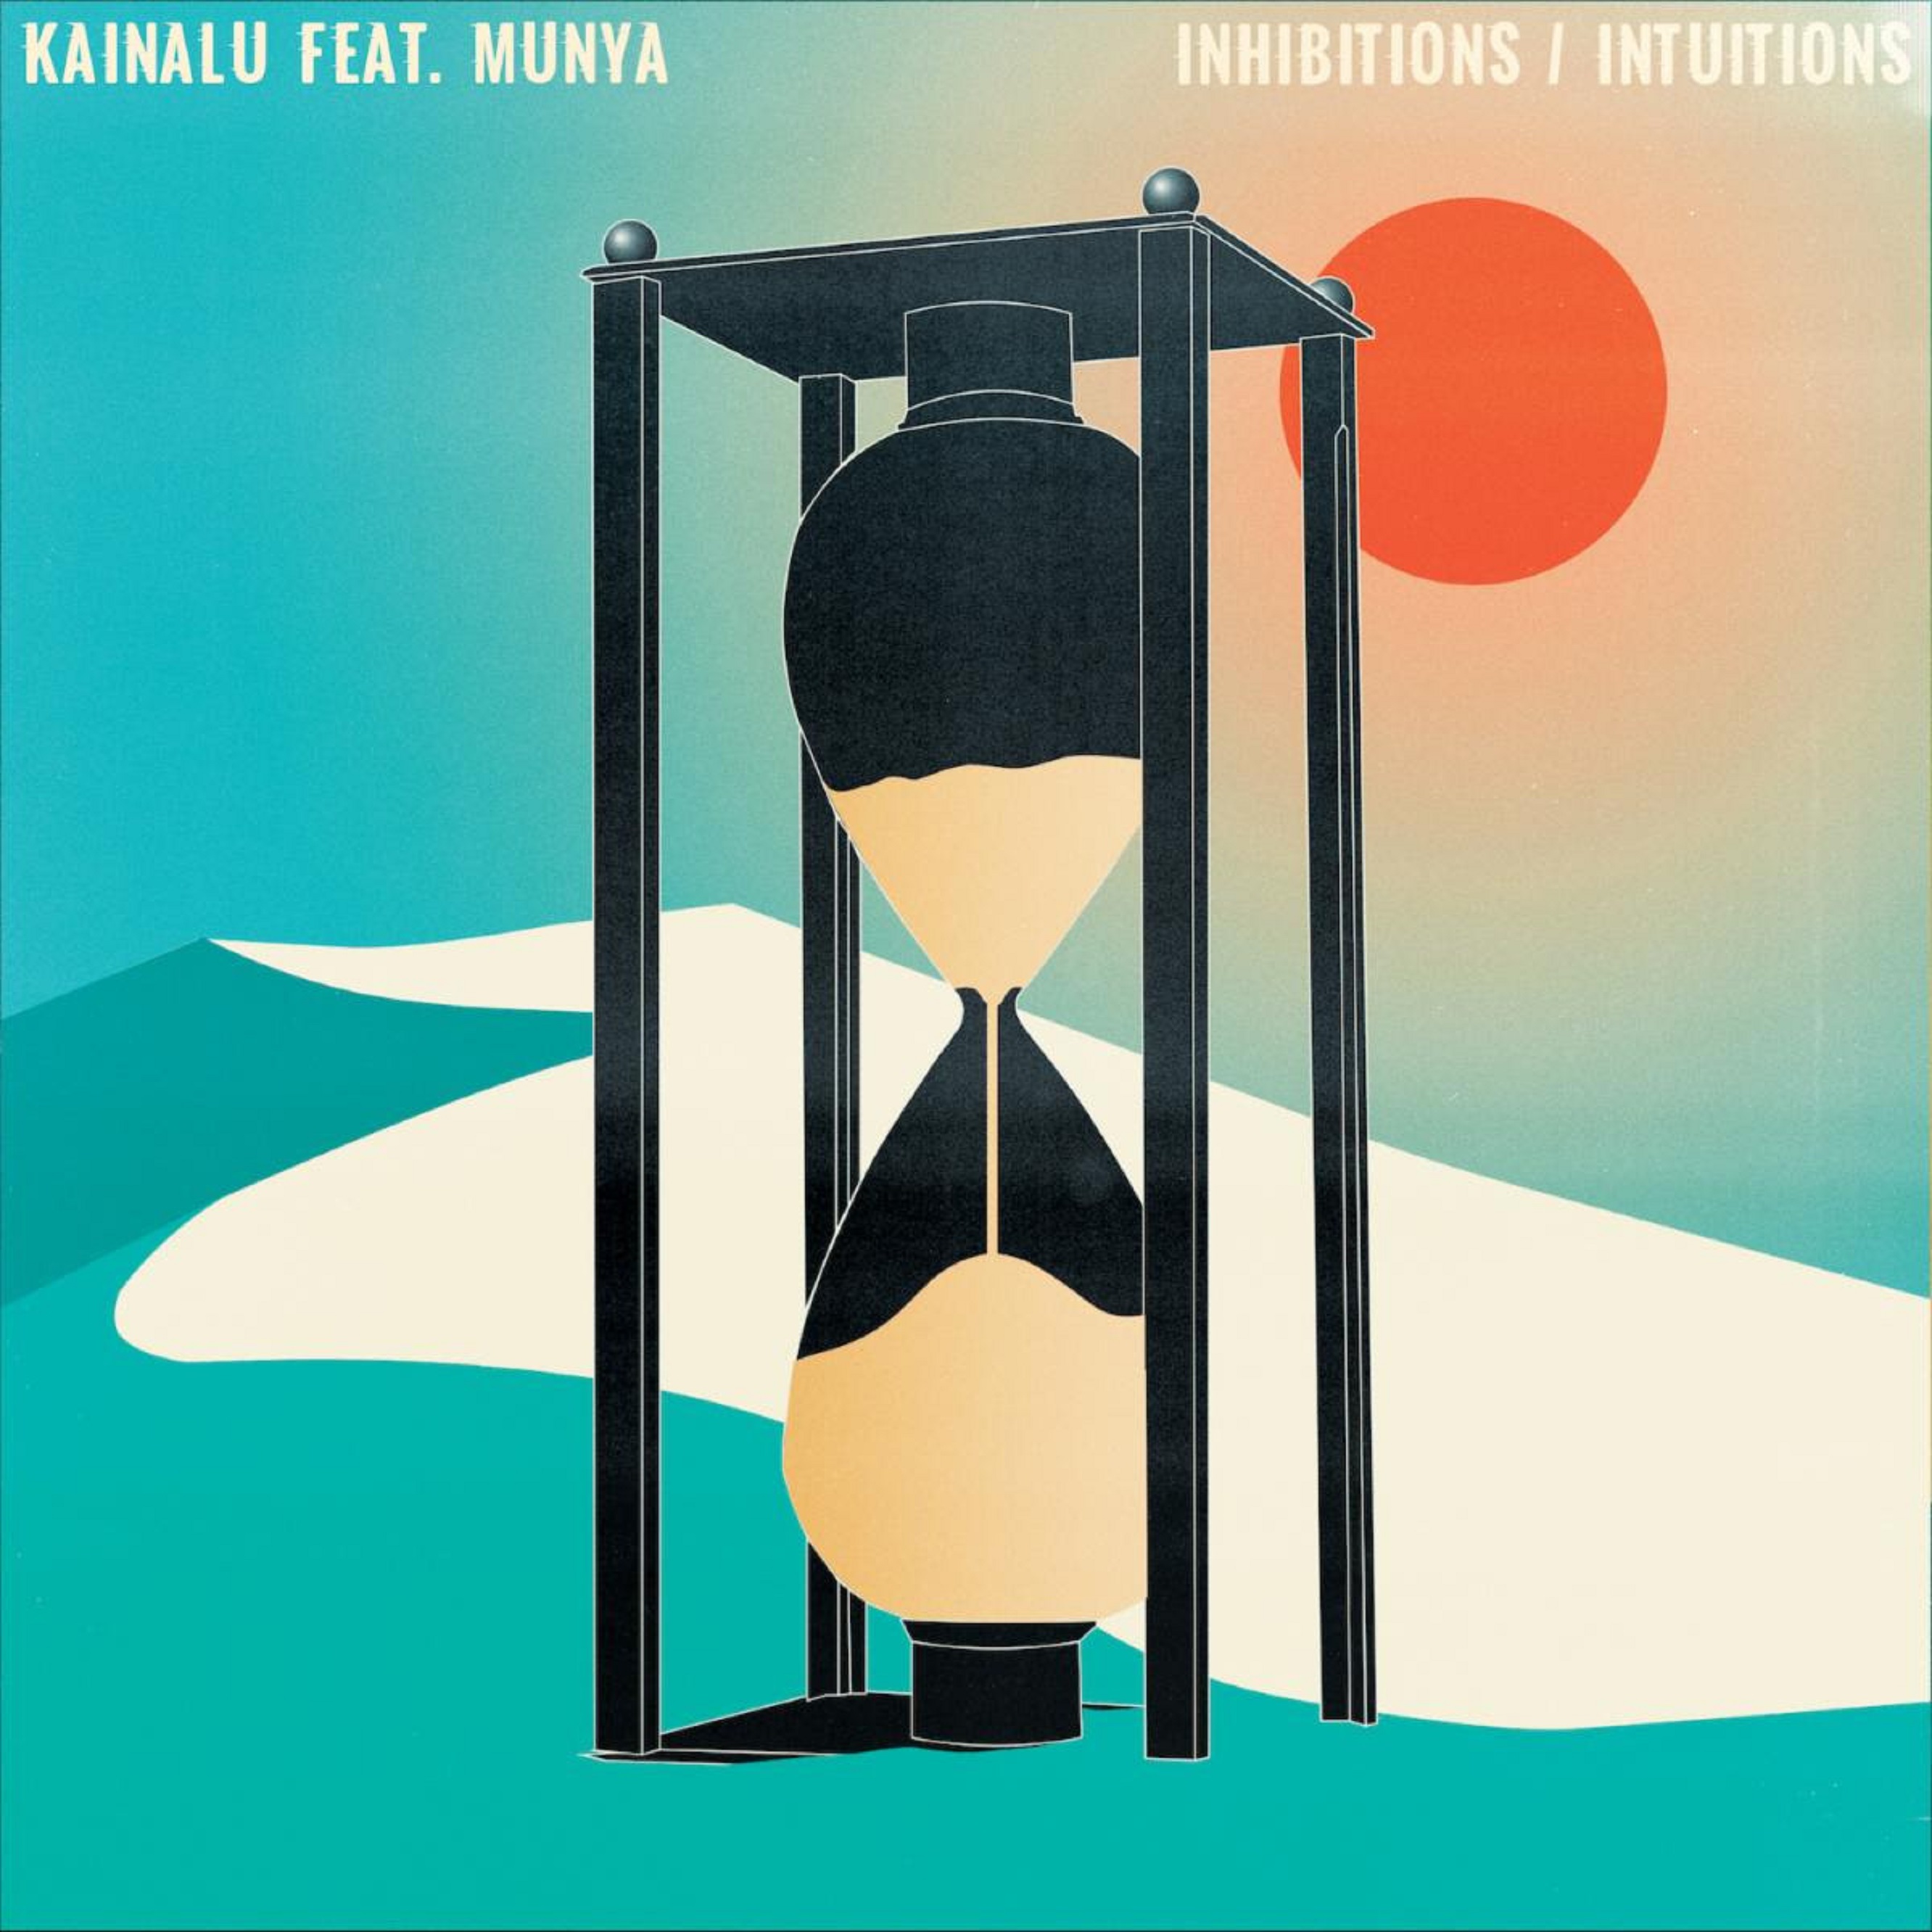 Multi-instrumentalist/producer Kainalu shares single "Inhibitions / Intuitions" feat. MUNYA | New LP 'Ginseng Hourglass' due out Nov. 4